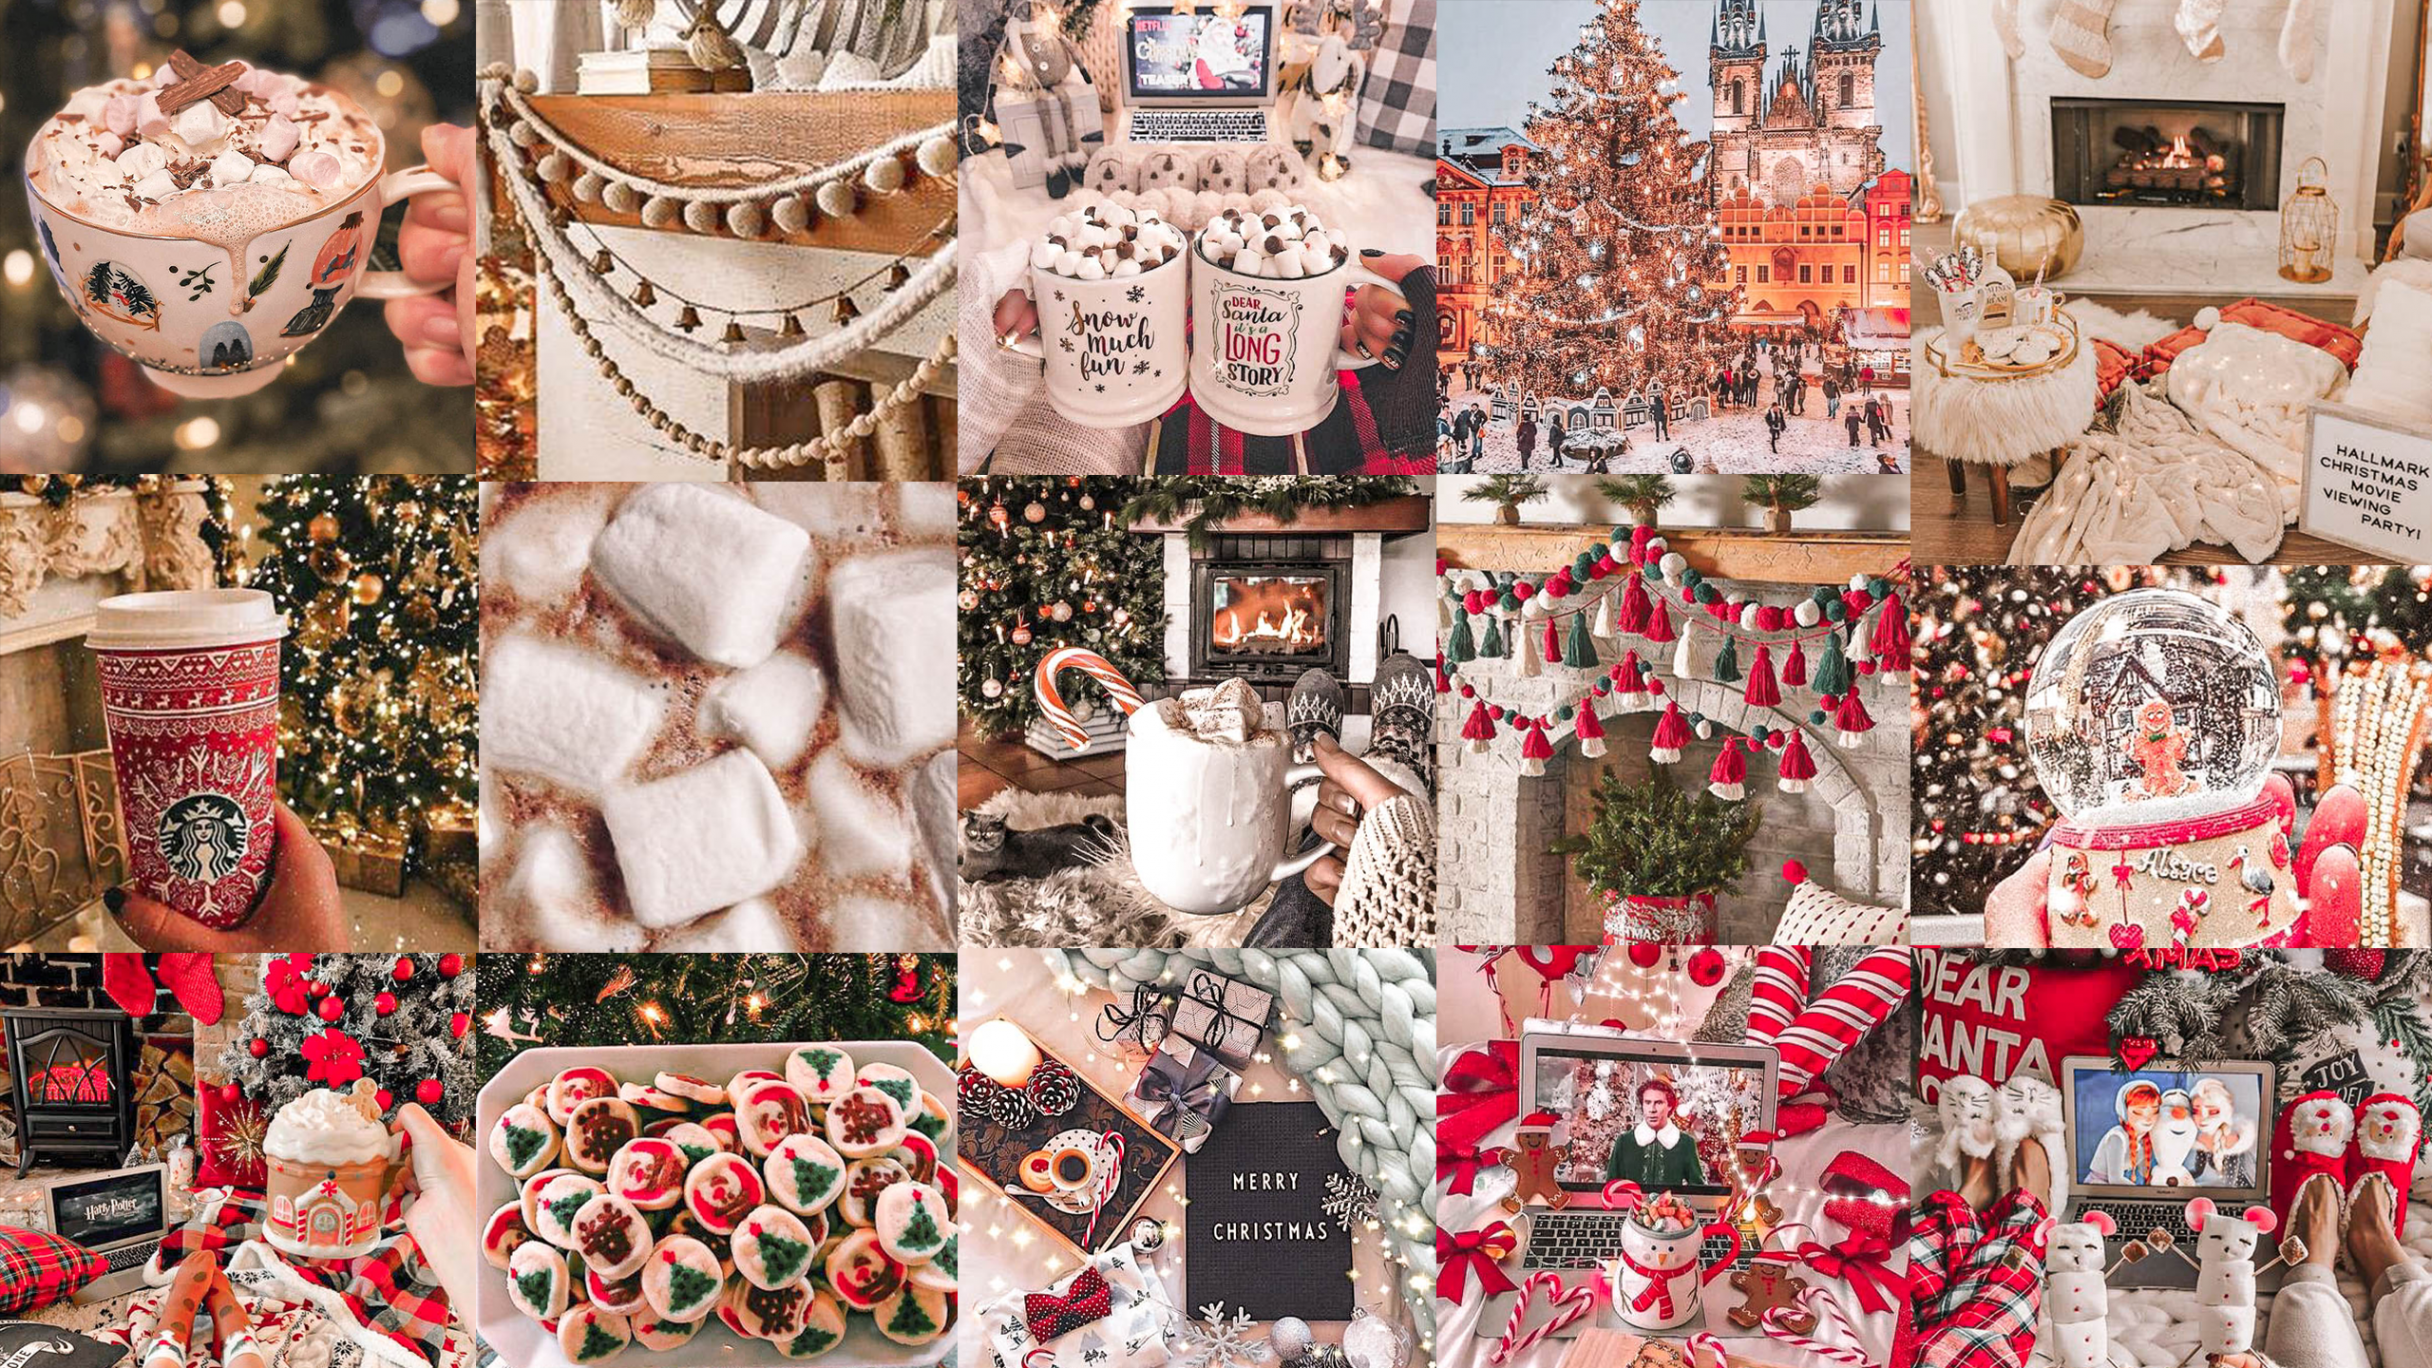 Christmas Aesthetic Wallpaper Collage for Desktop Computers - iMac